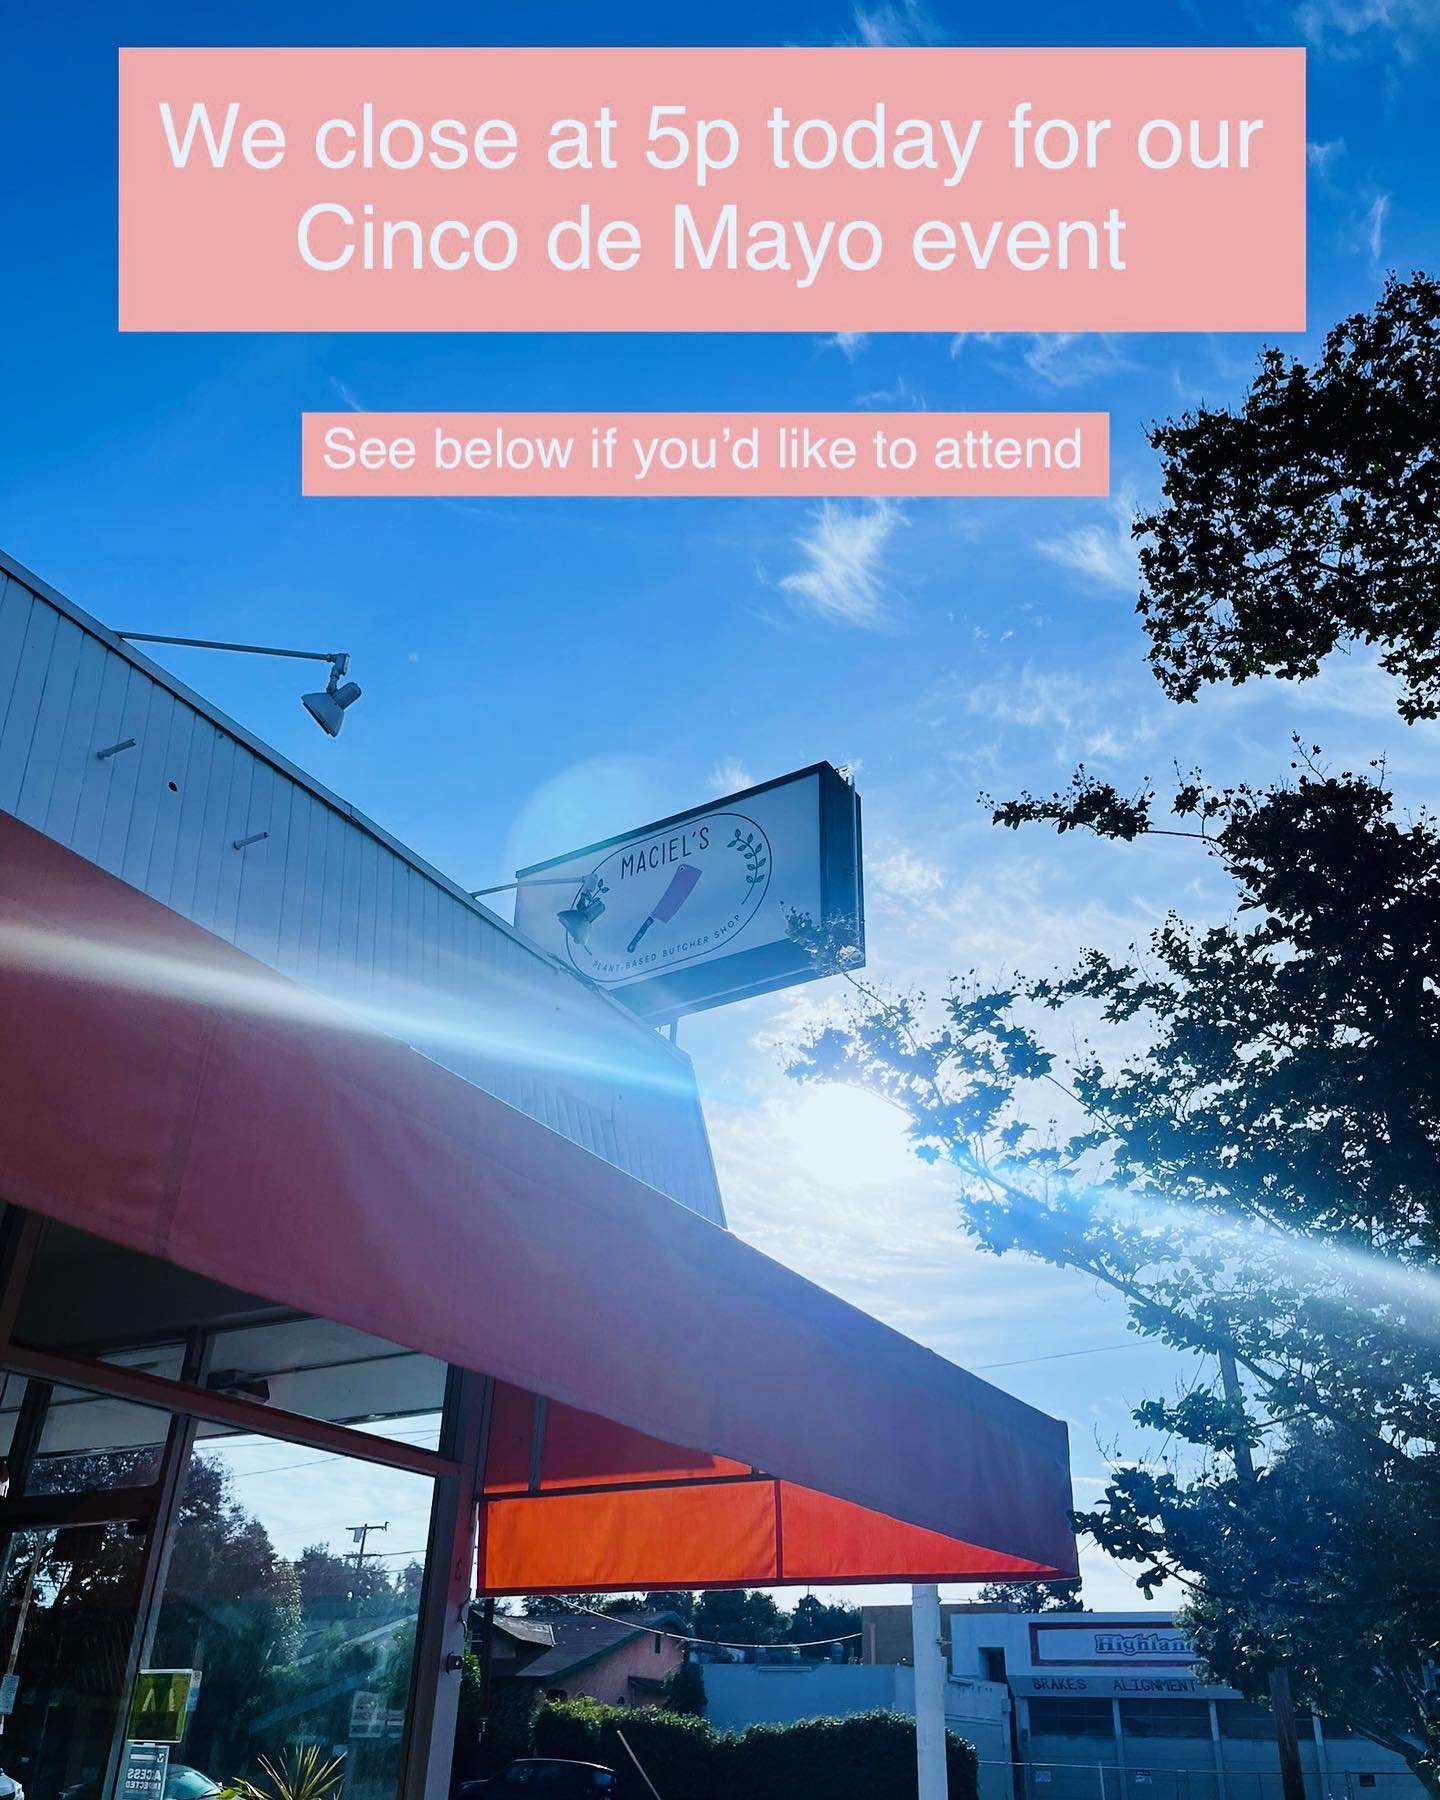 There is still some space left if you&rsquo;d like to come by our Highland Park Cinco de Mayo event! Reserve your order (dine-in or takeout) in the link in bio. 6p-8:30p

Or if you&rsquo;re on the west side, come by our Sunday Boozy Brunch pop-up at 